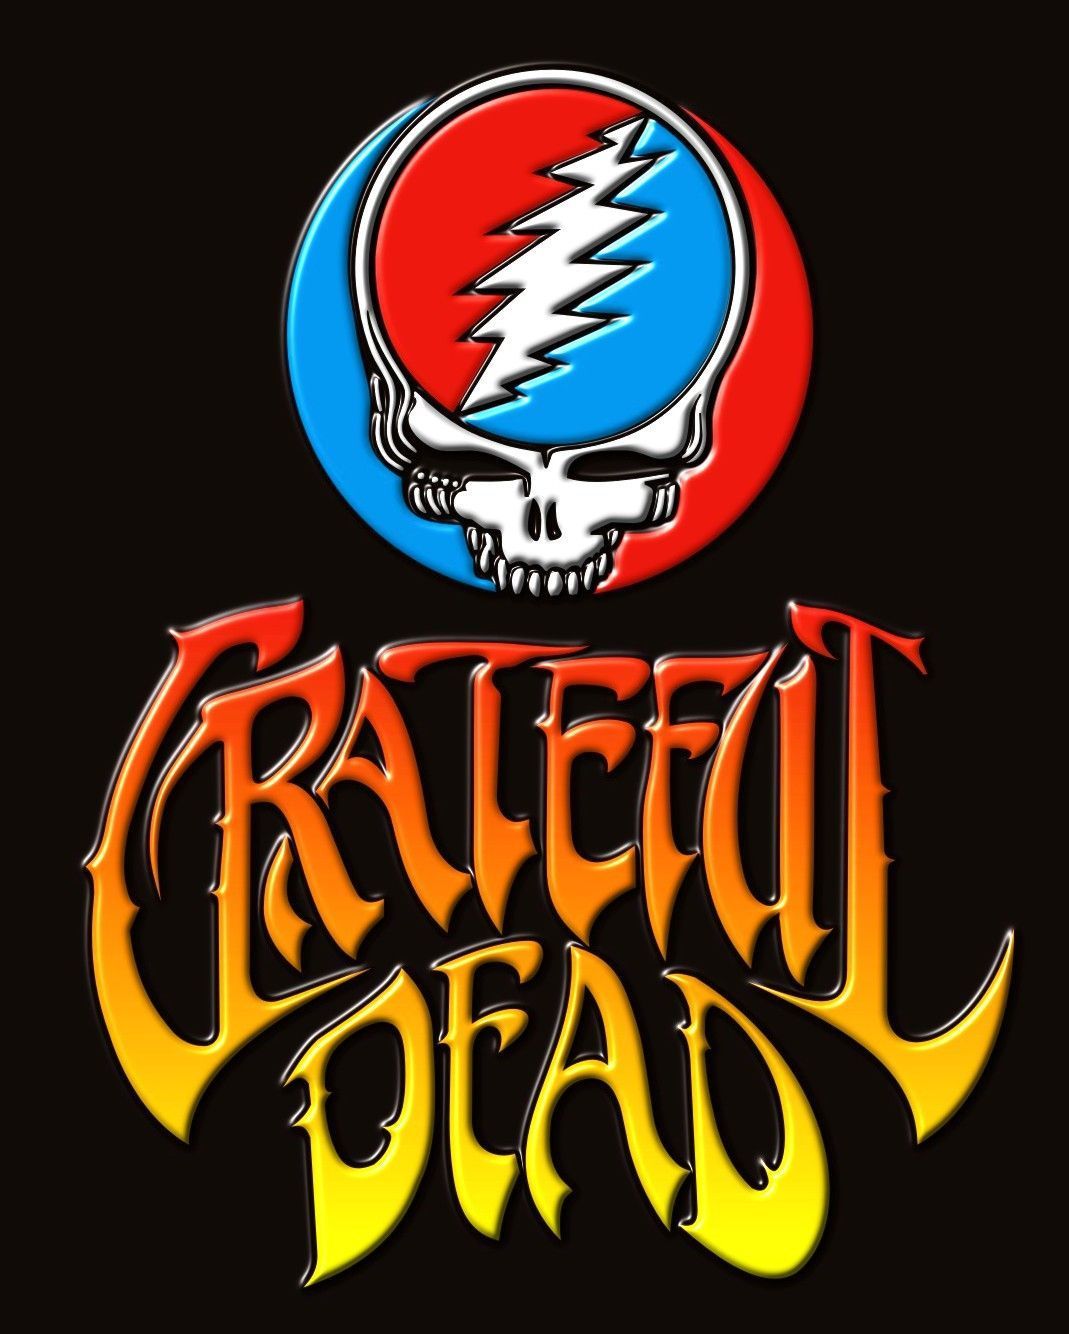 Dennis McNally of The Grateful Dead Family - »